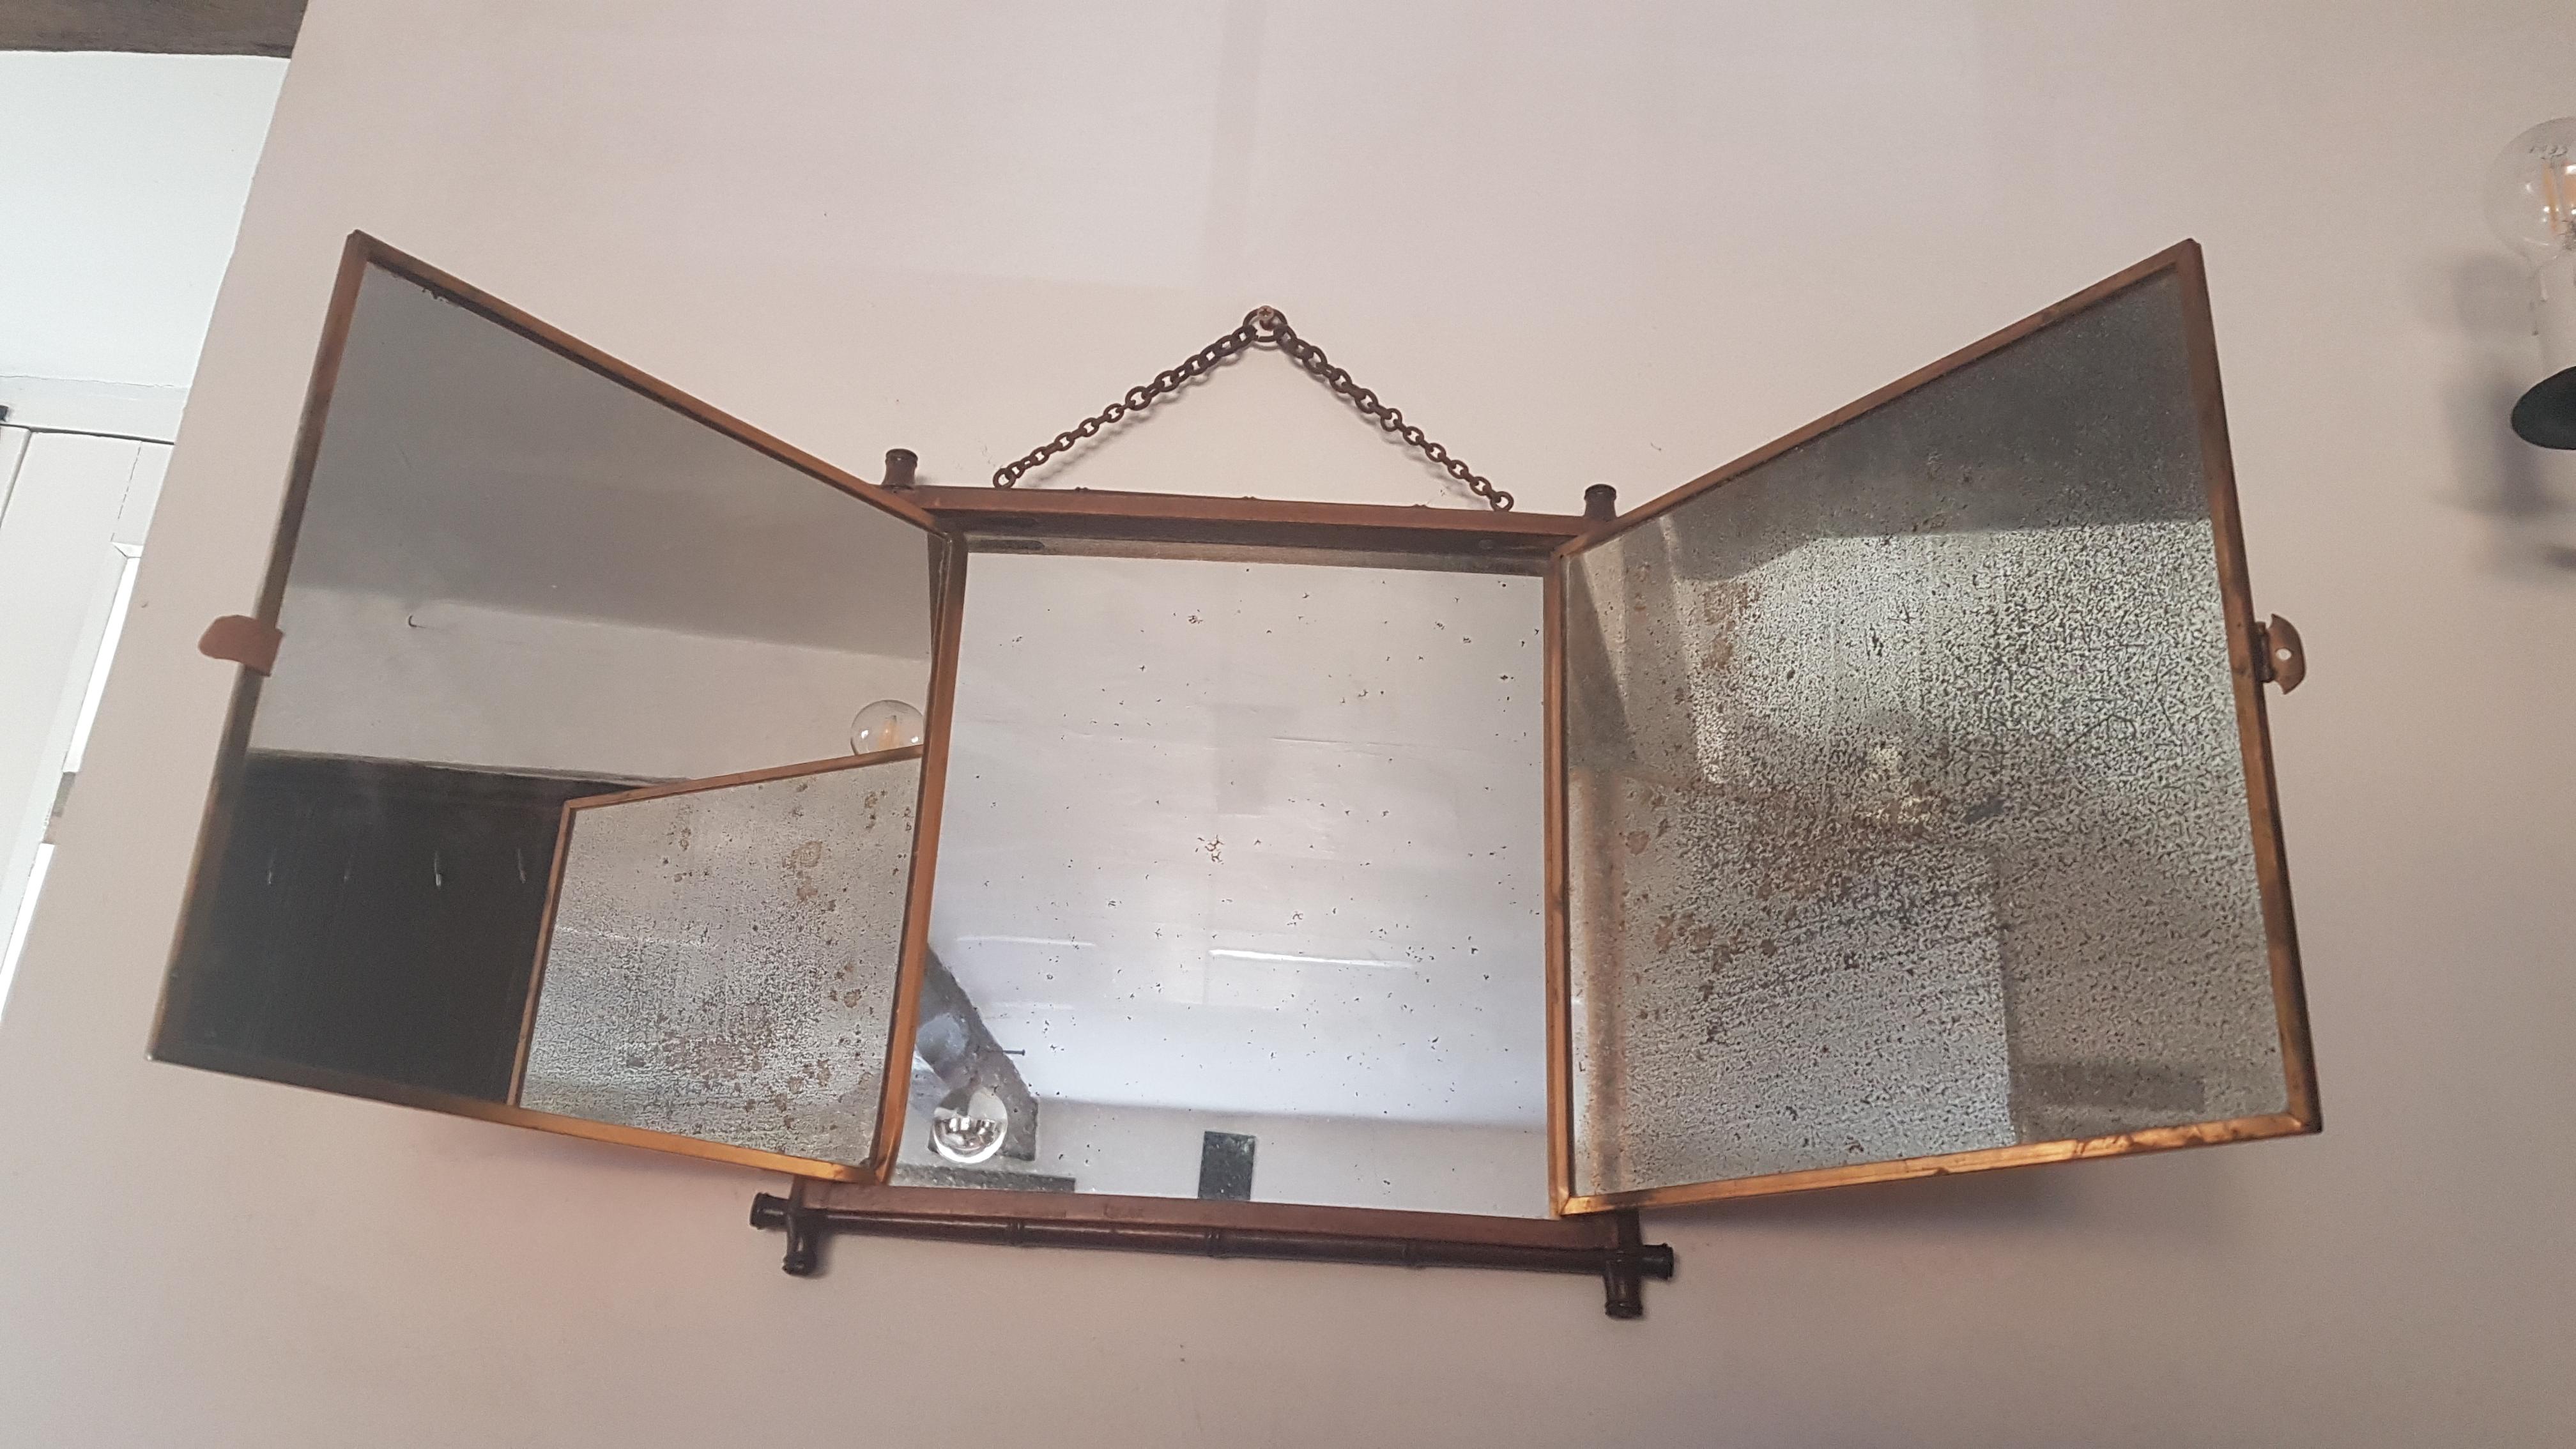 A tryptic mirror by the renowned Miroir Brot company in France. Miroir Brot invented, designed & patented this form of tryptic mechanism which at the time was very innovative. The mirror is contained within a decorative faux bamboo frame which is in